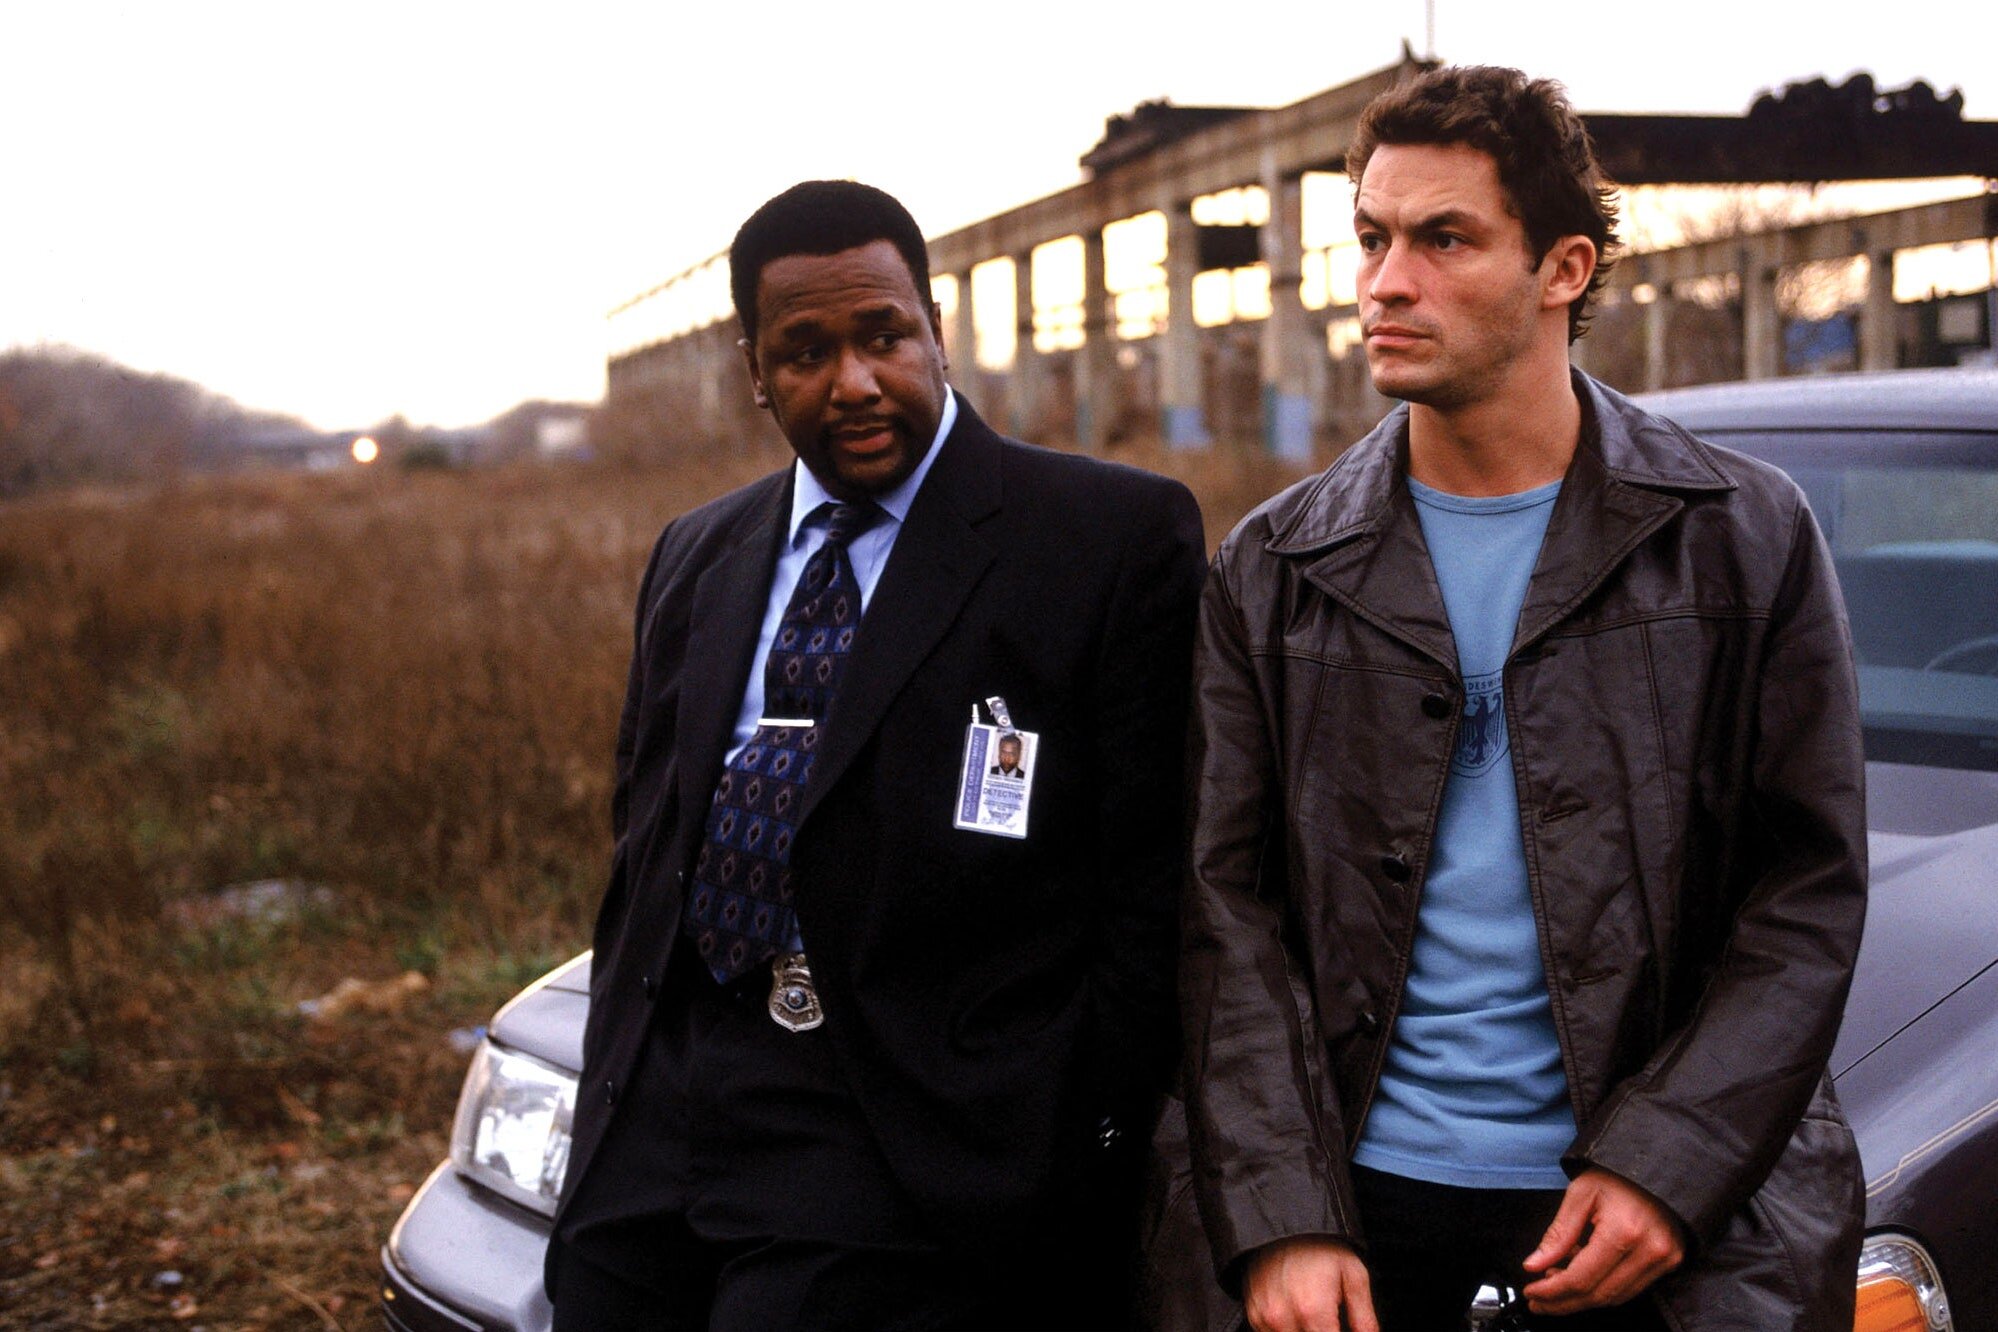 The Wire’s strong ensemble cast and subject matter makes it wonderful viewing.